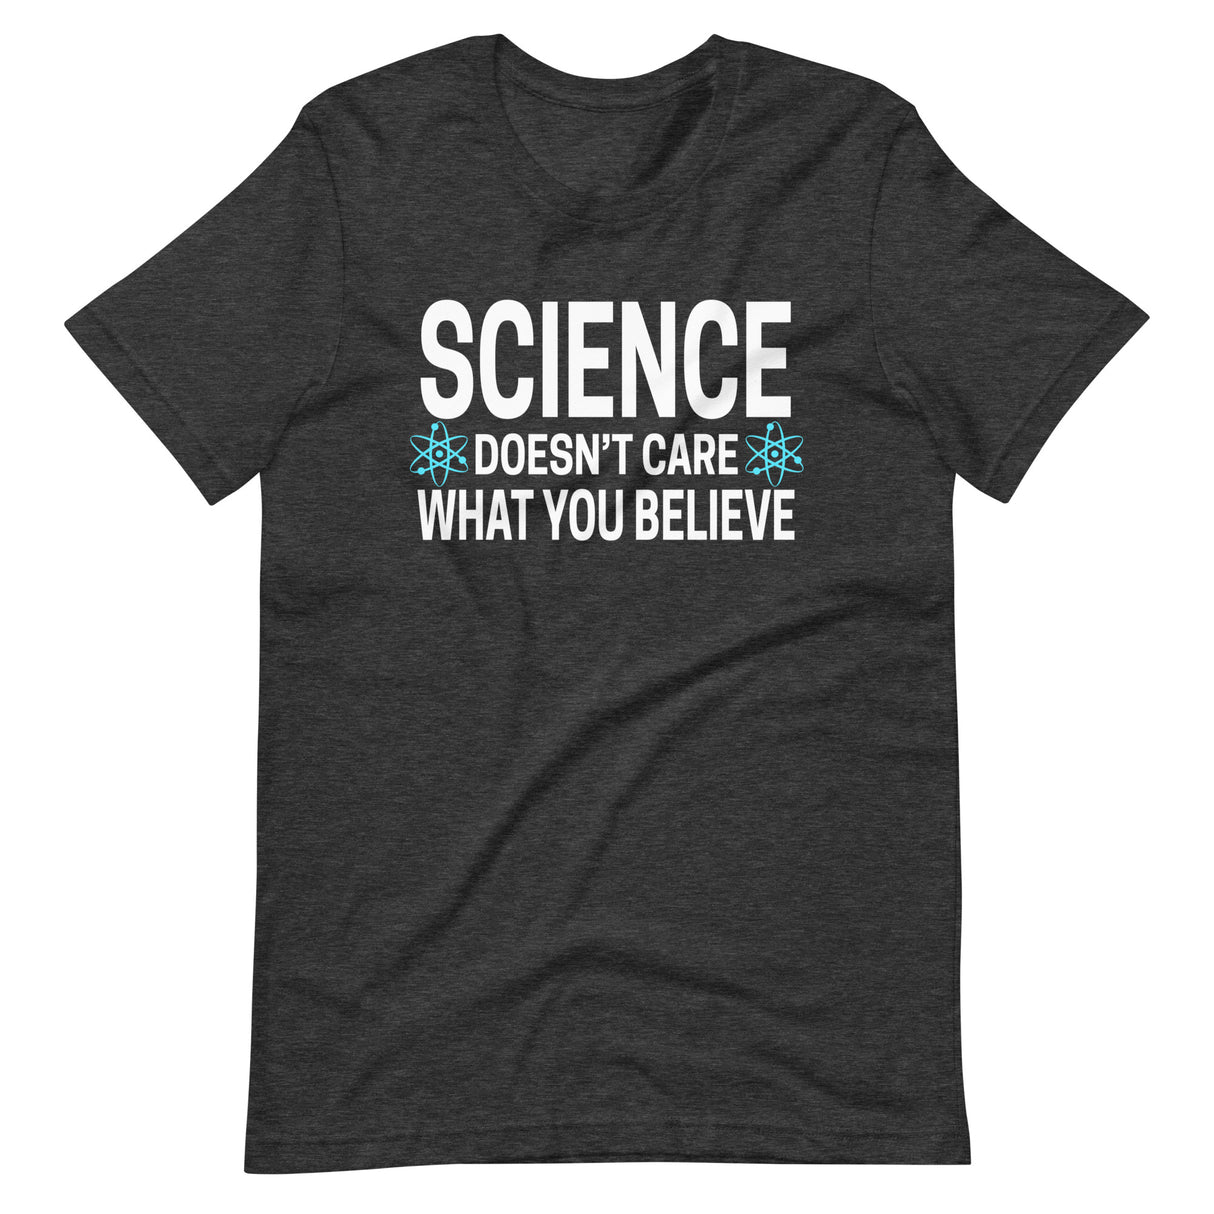 Science Doesn't Care What You Believe Shirt